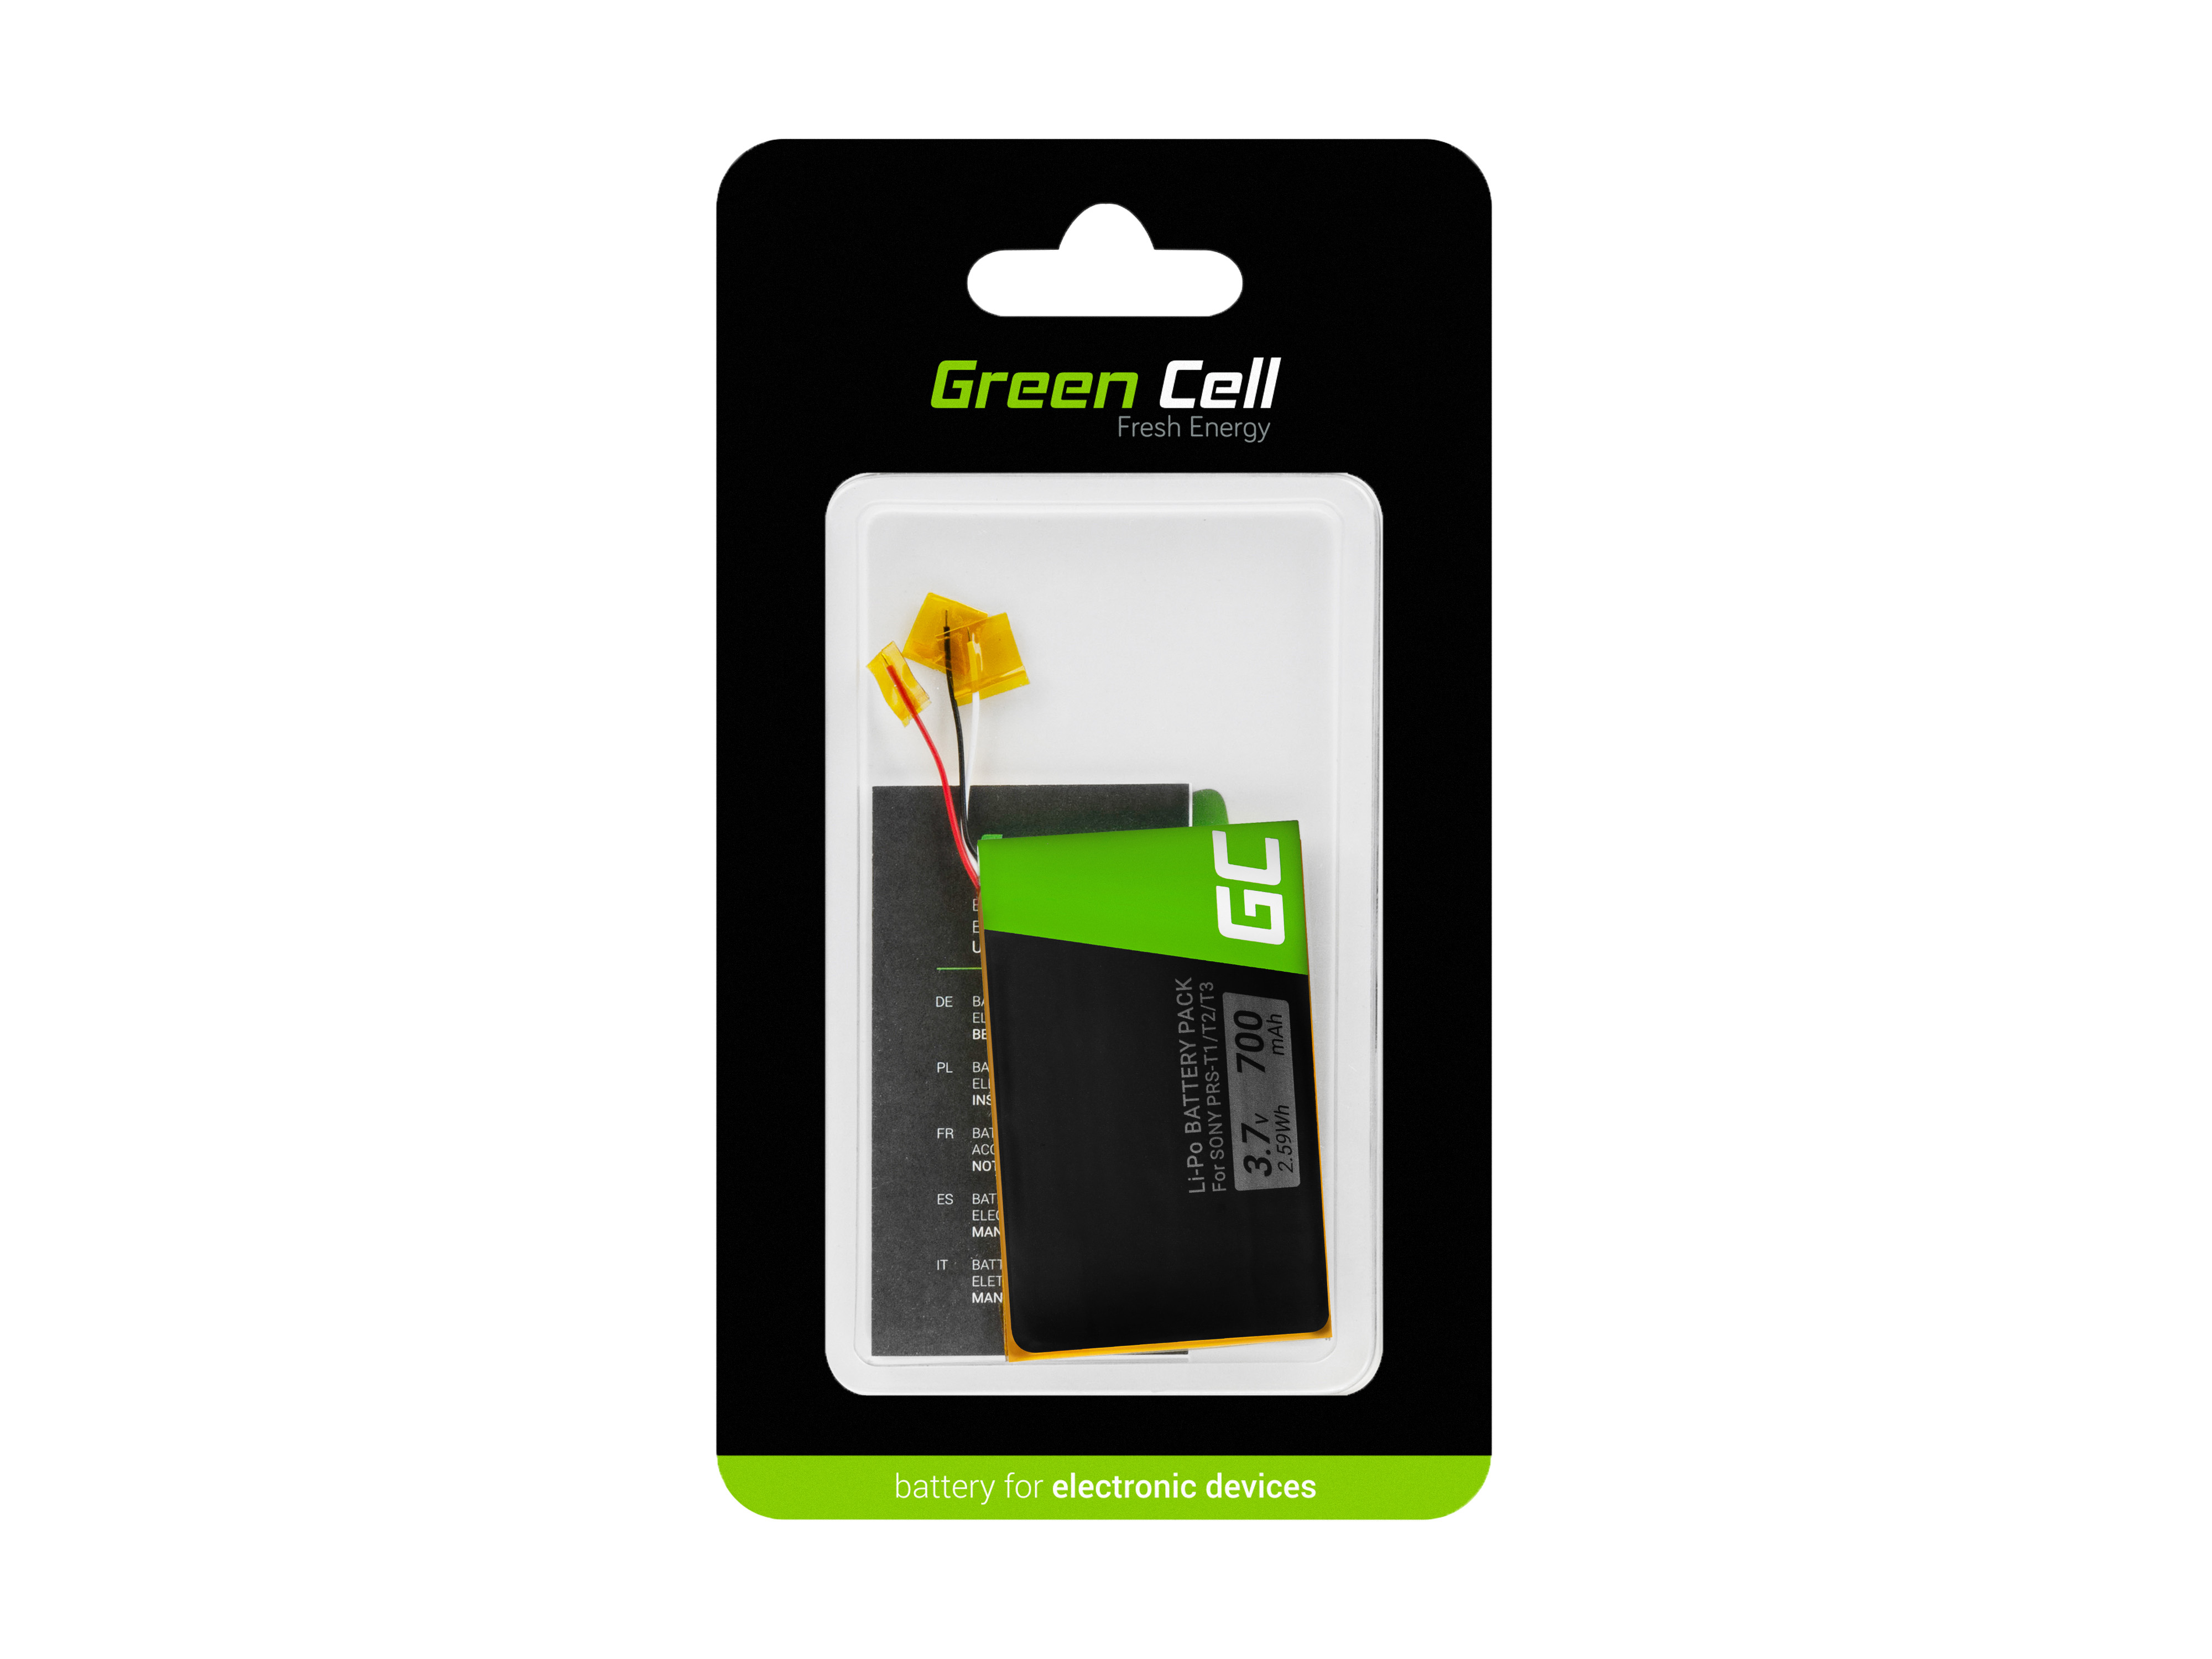 Green Cell ® Battery 1-756-769-11 for Sony Portable Reader System PRS-500 oraz PRS-505 E-book reader